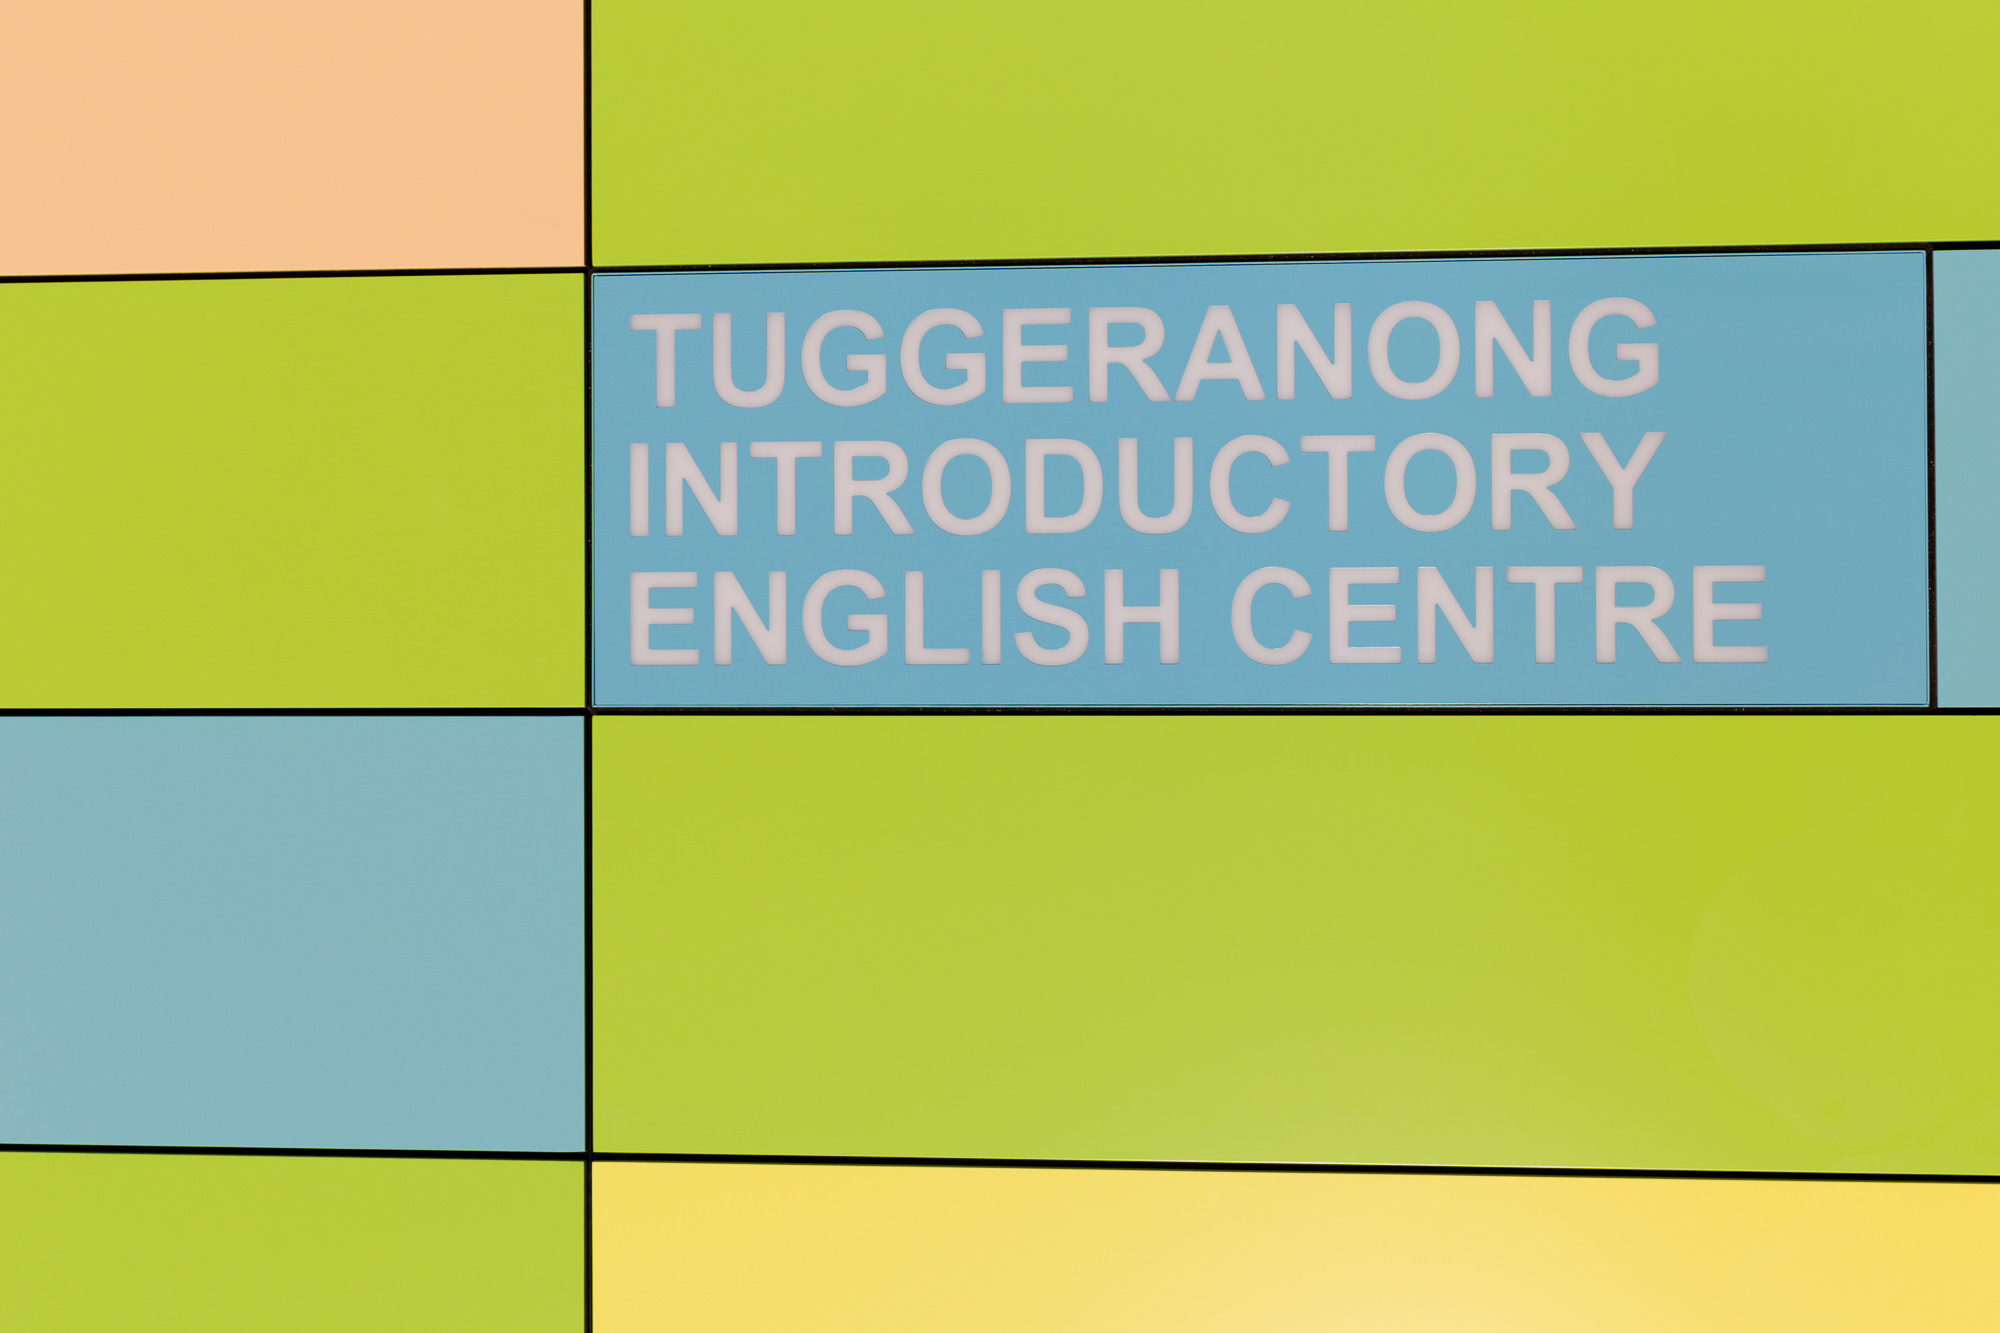 tuggeranong introductory english centre-16